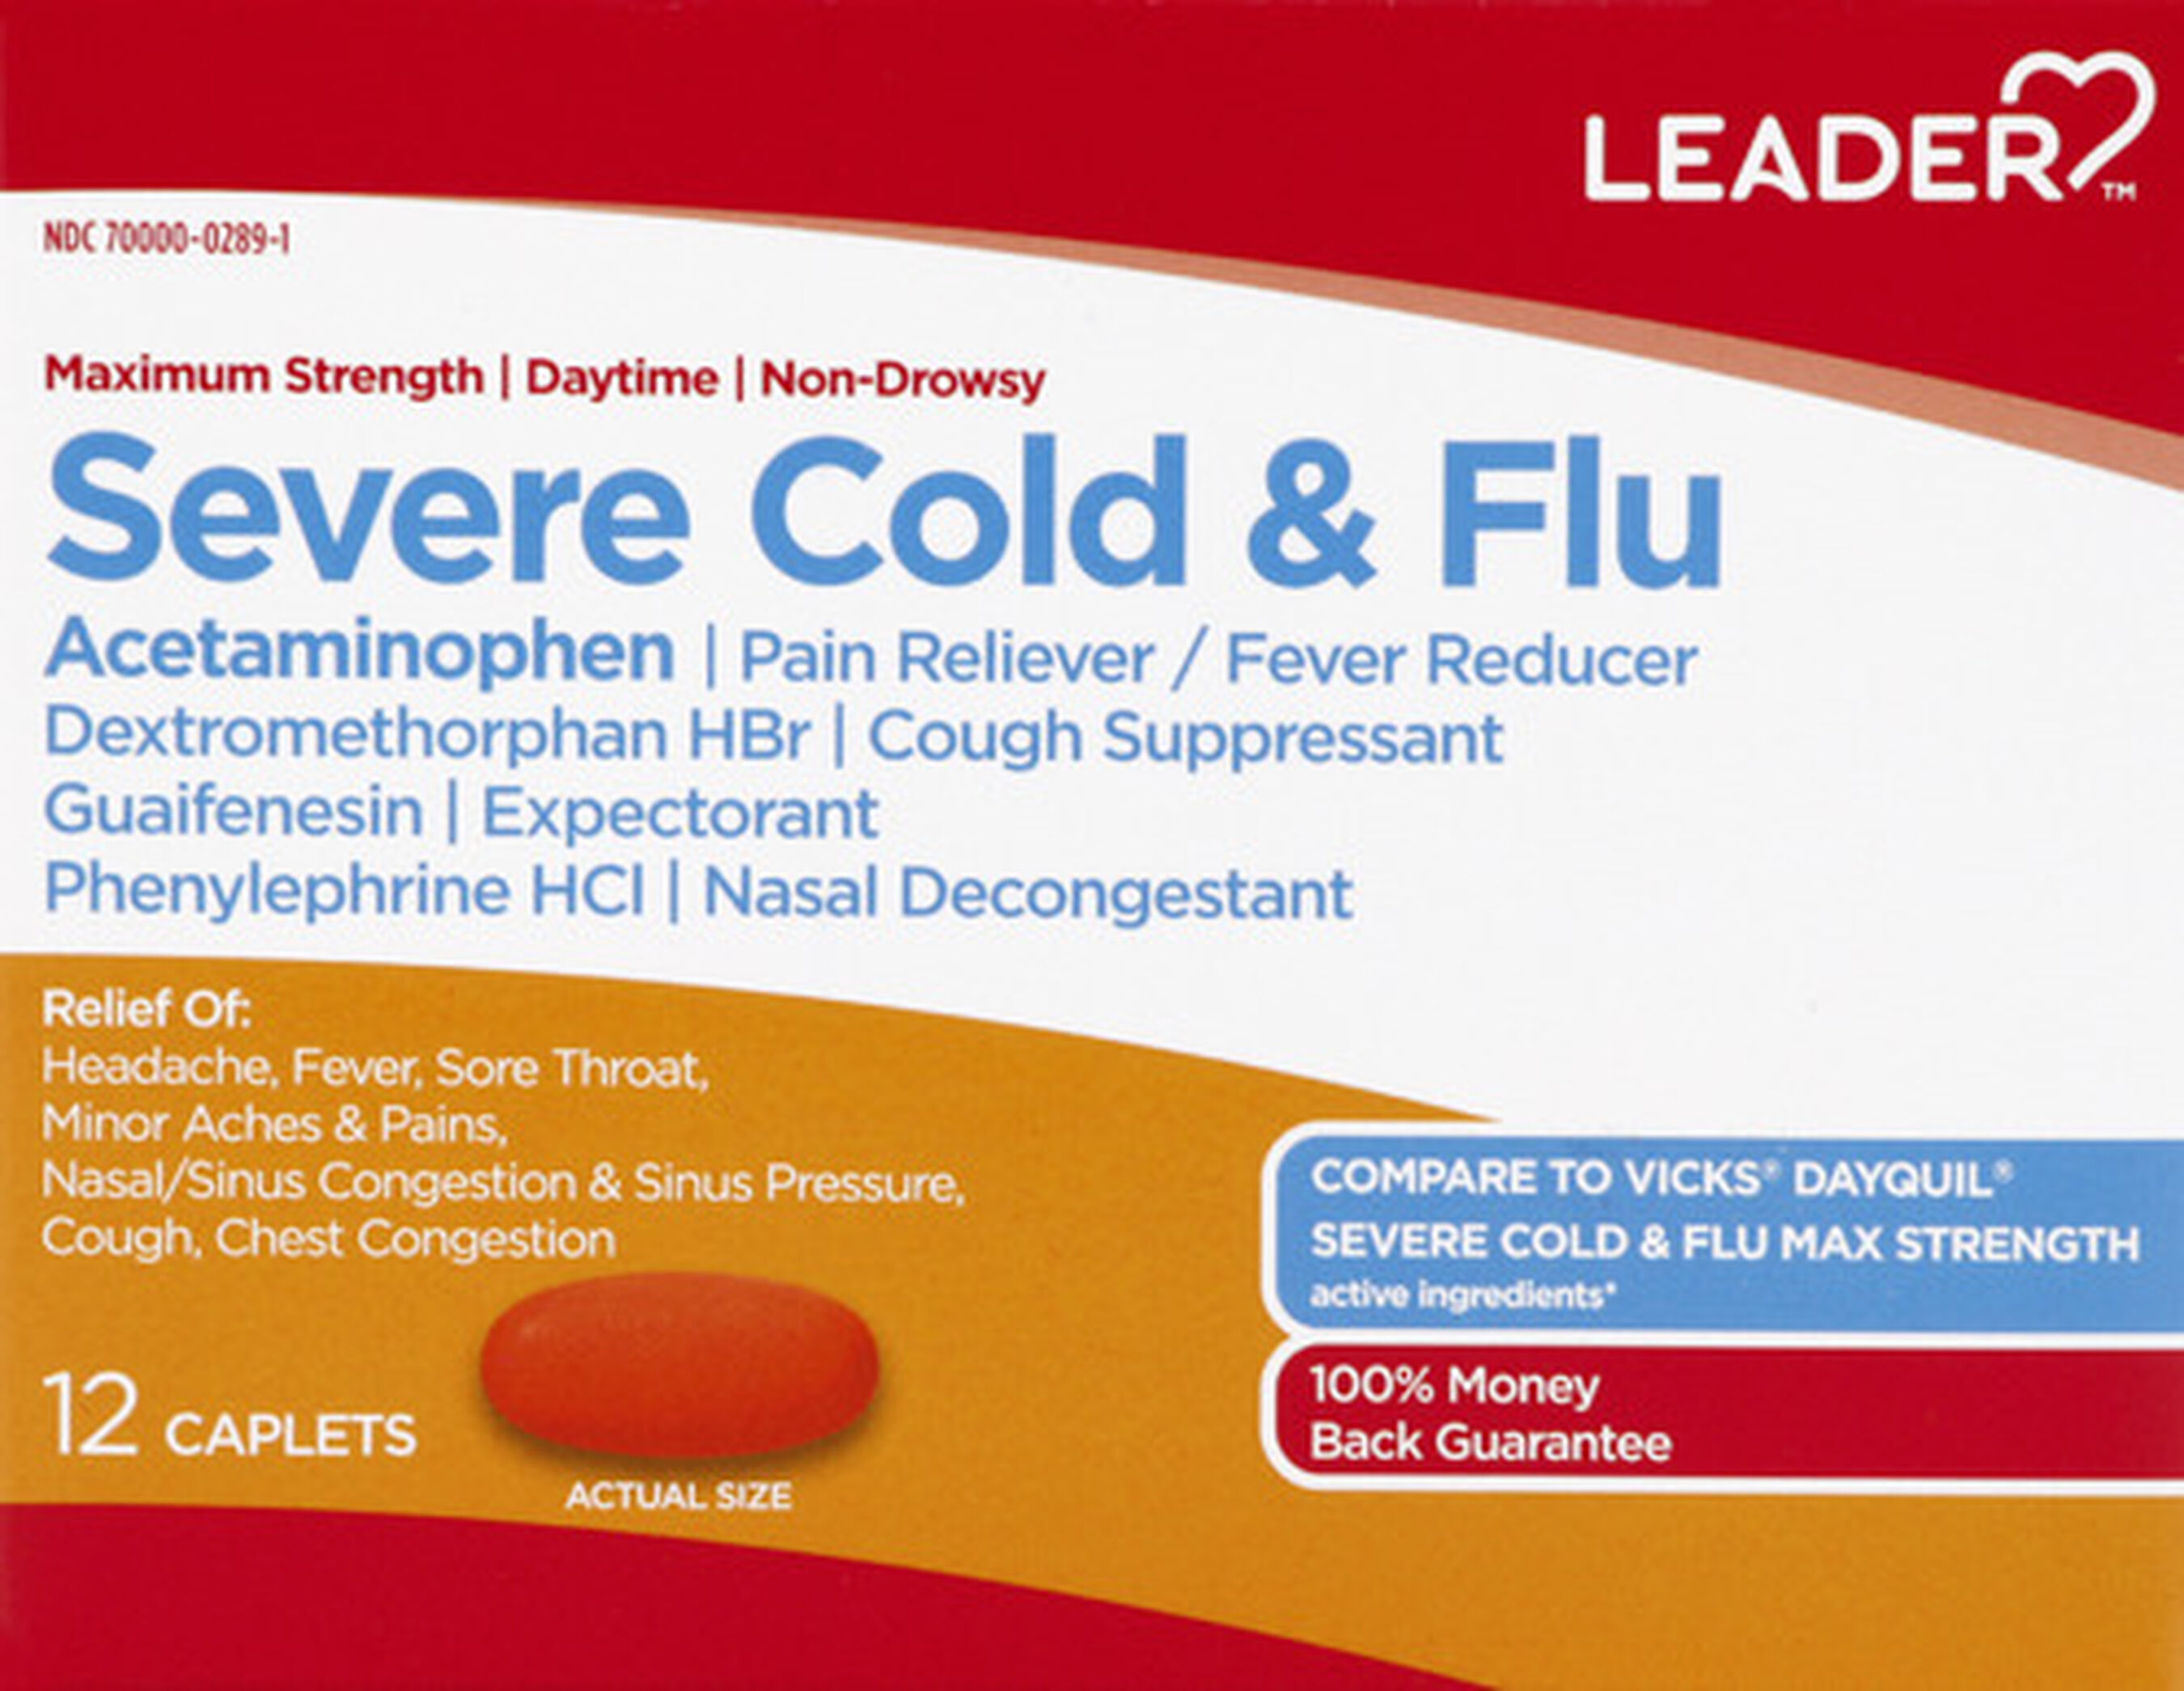 Leader™ Cold And Flu Severe Daytime Maximum Strength Caplets 12 Ct